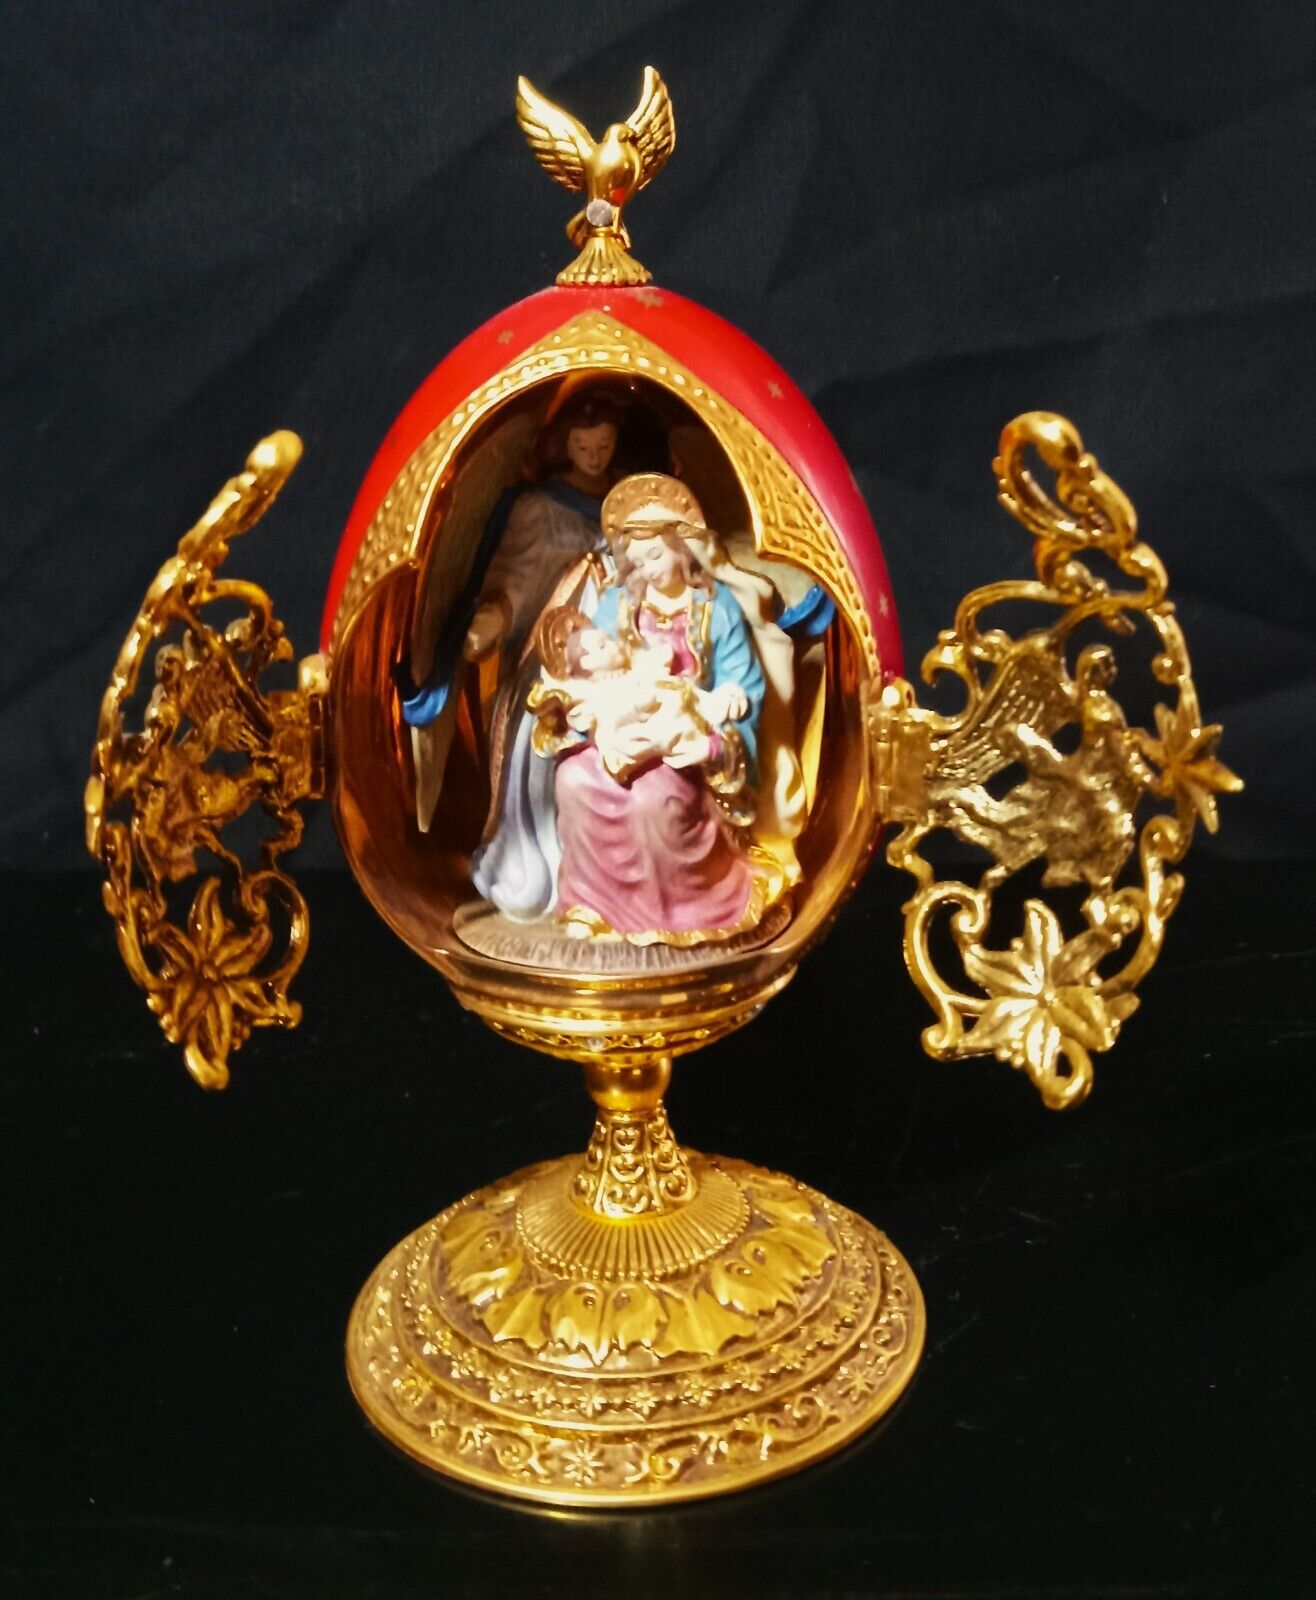 Glorious Adoration Limited Edition A King Is Born Franklin Mint Red